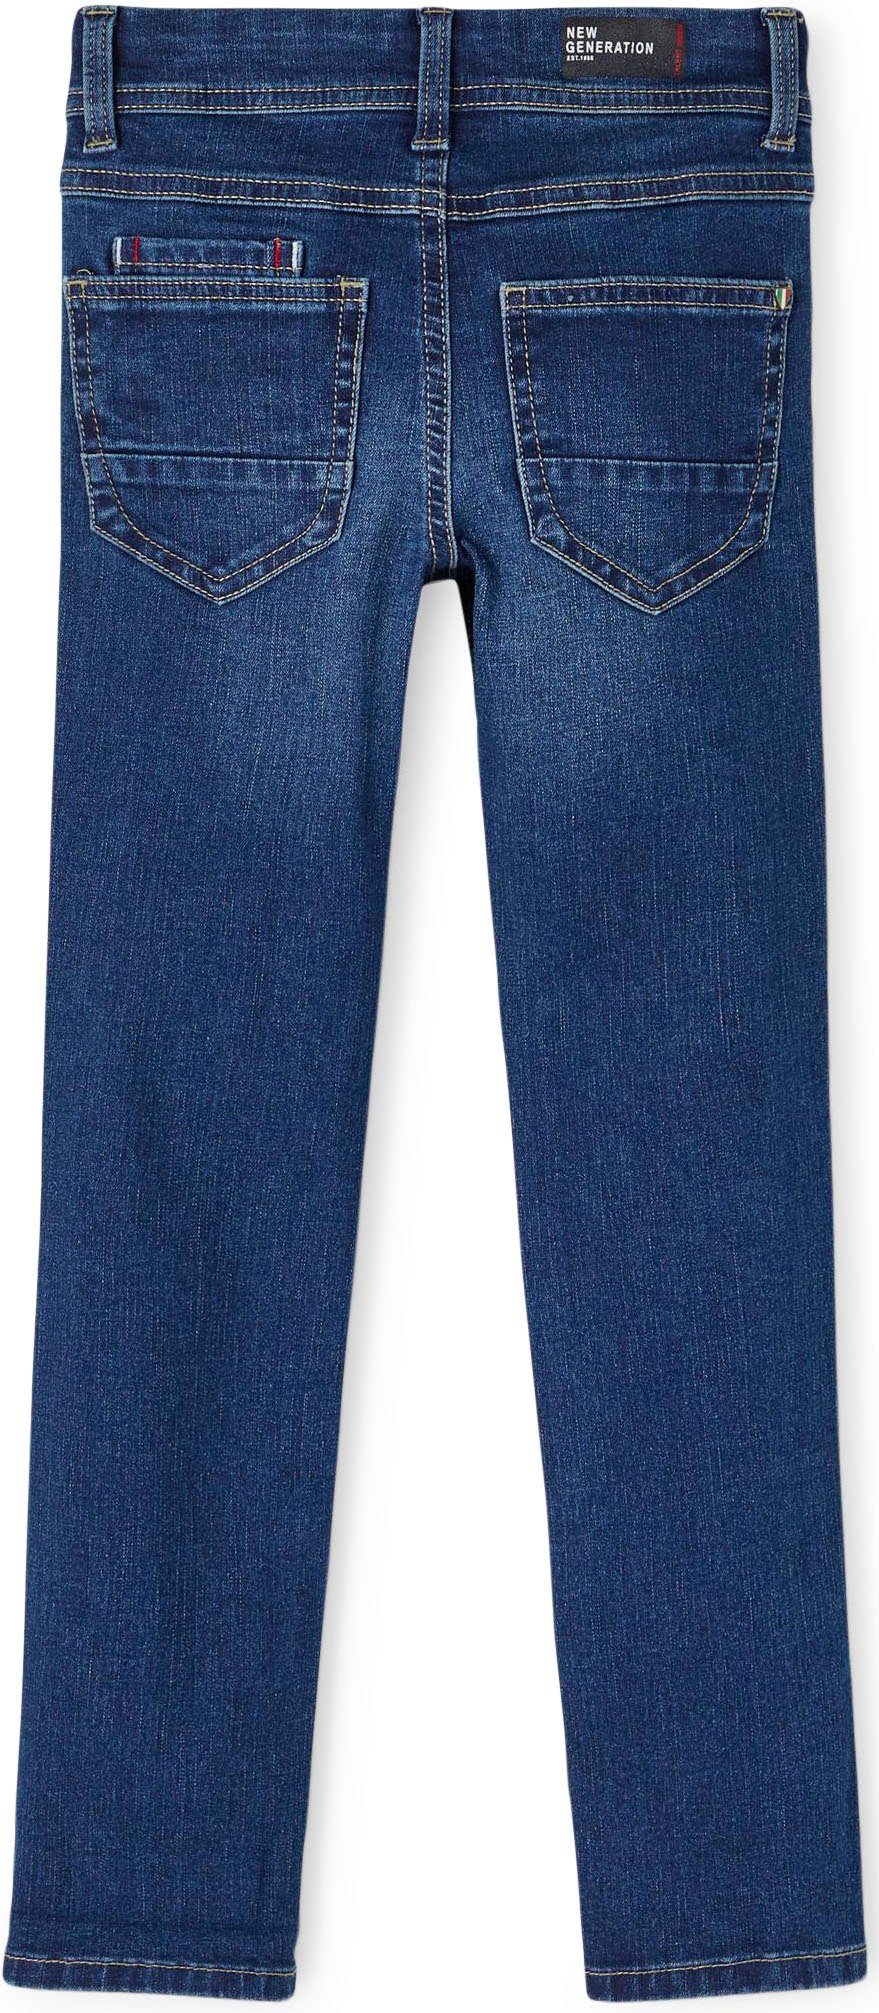 It PANT Name OTTO 3618 DNMTAUL de in Stretch shop jeans online NKMTHEO |